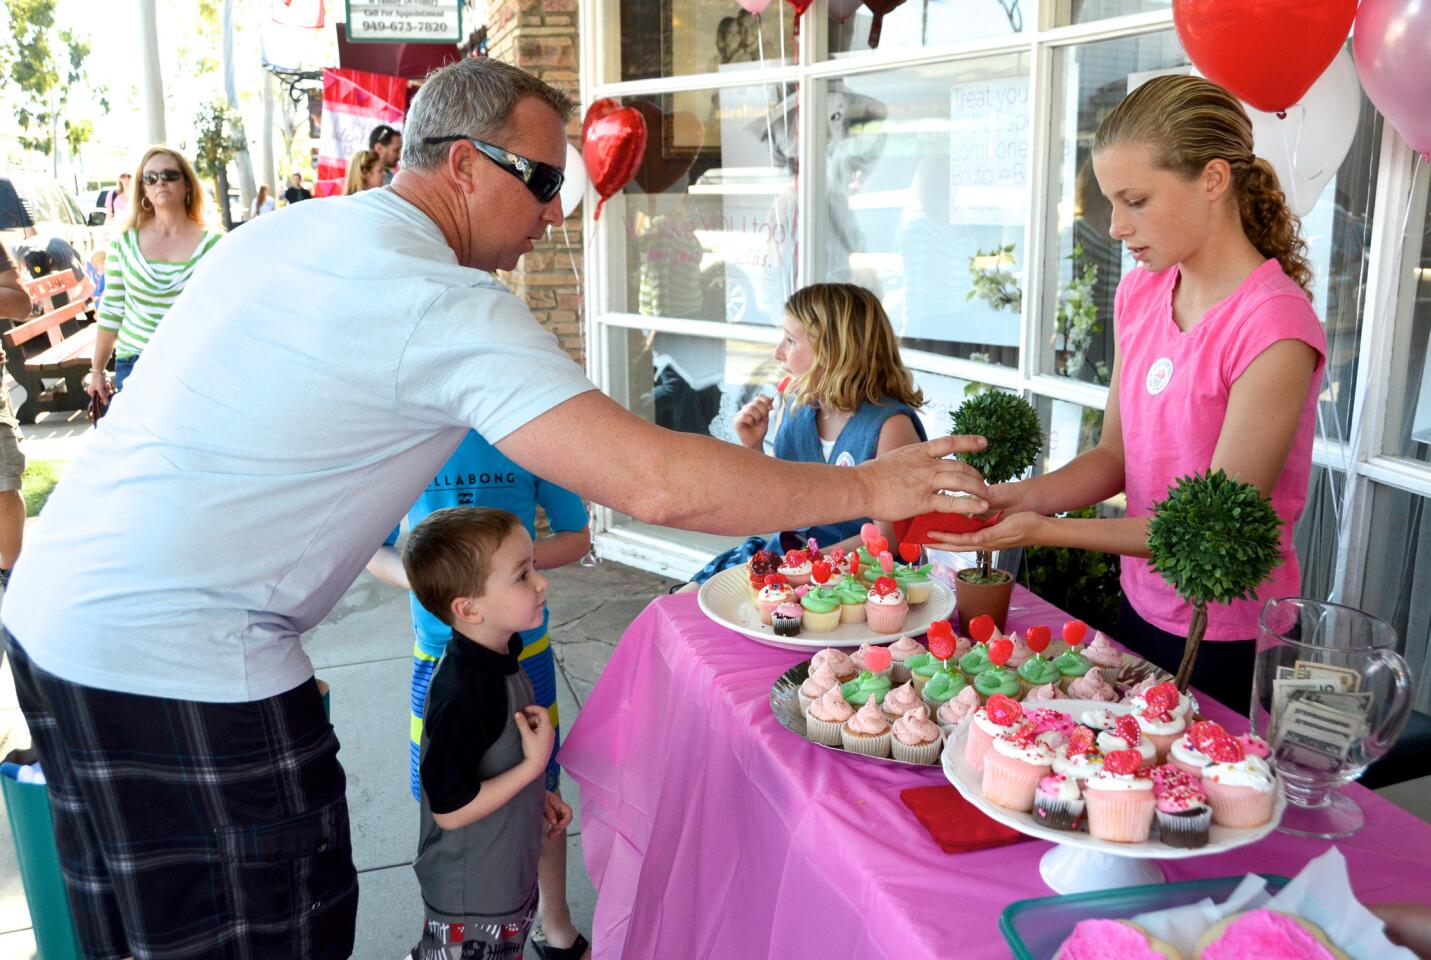 The Bell family supports the cause by purchasing cupcakes during the Courageous Cupcakes fundraiser Saturday at Classic Kids on Balboa Island.